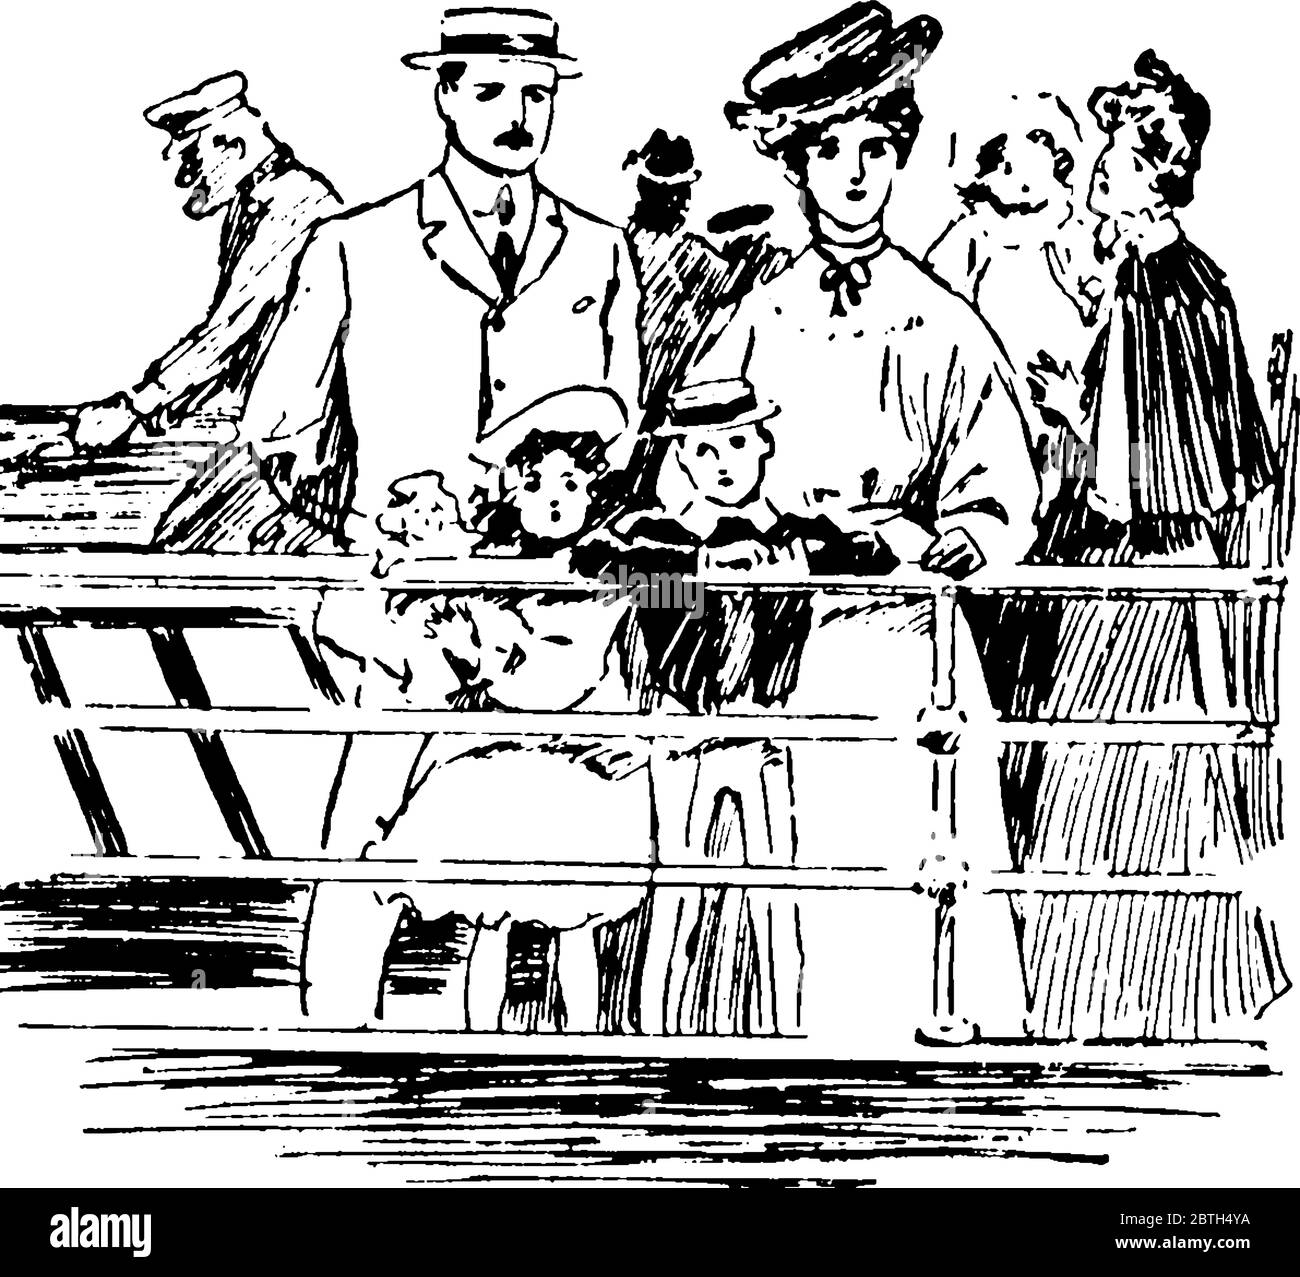 The picture depicts few men and children with their toys, travelling by boat and admiring the scenic view, vintage line drawing or engraving illustrat Stock Vector